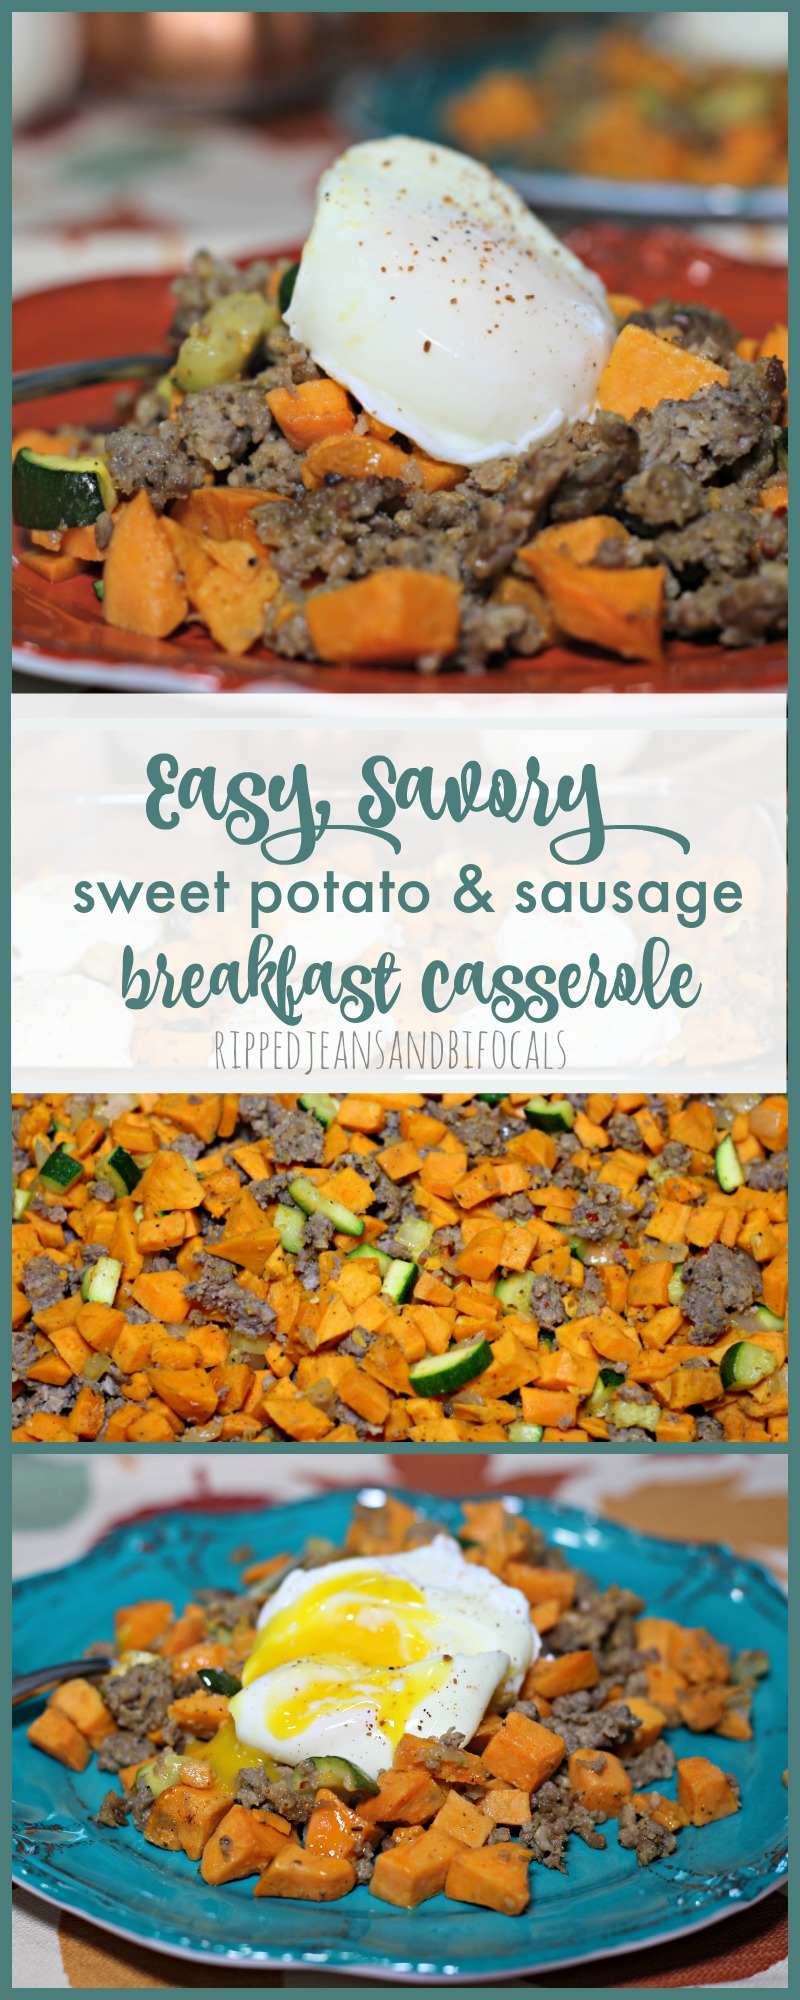 Savory sweet potato and sausage breakfast casserole|Ripped Jeans and Bifocals